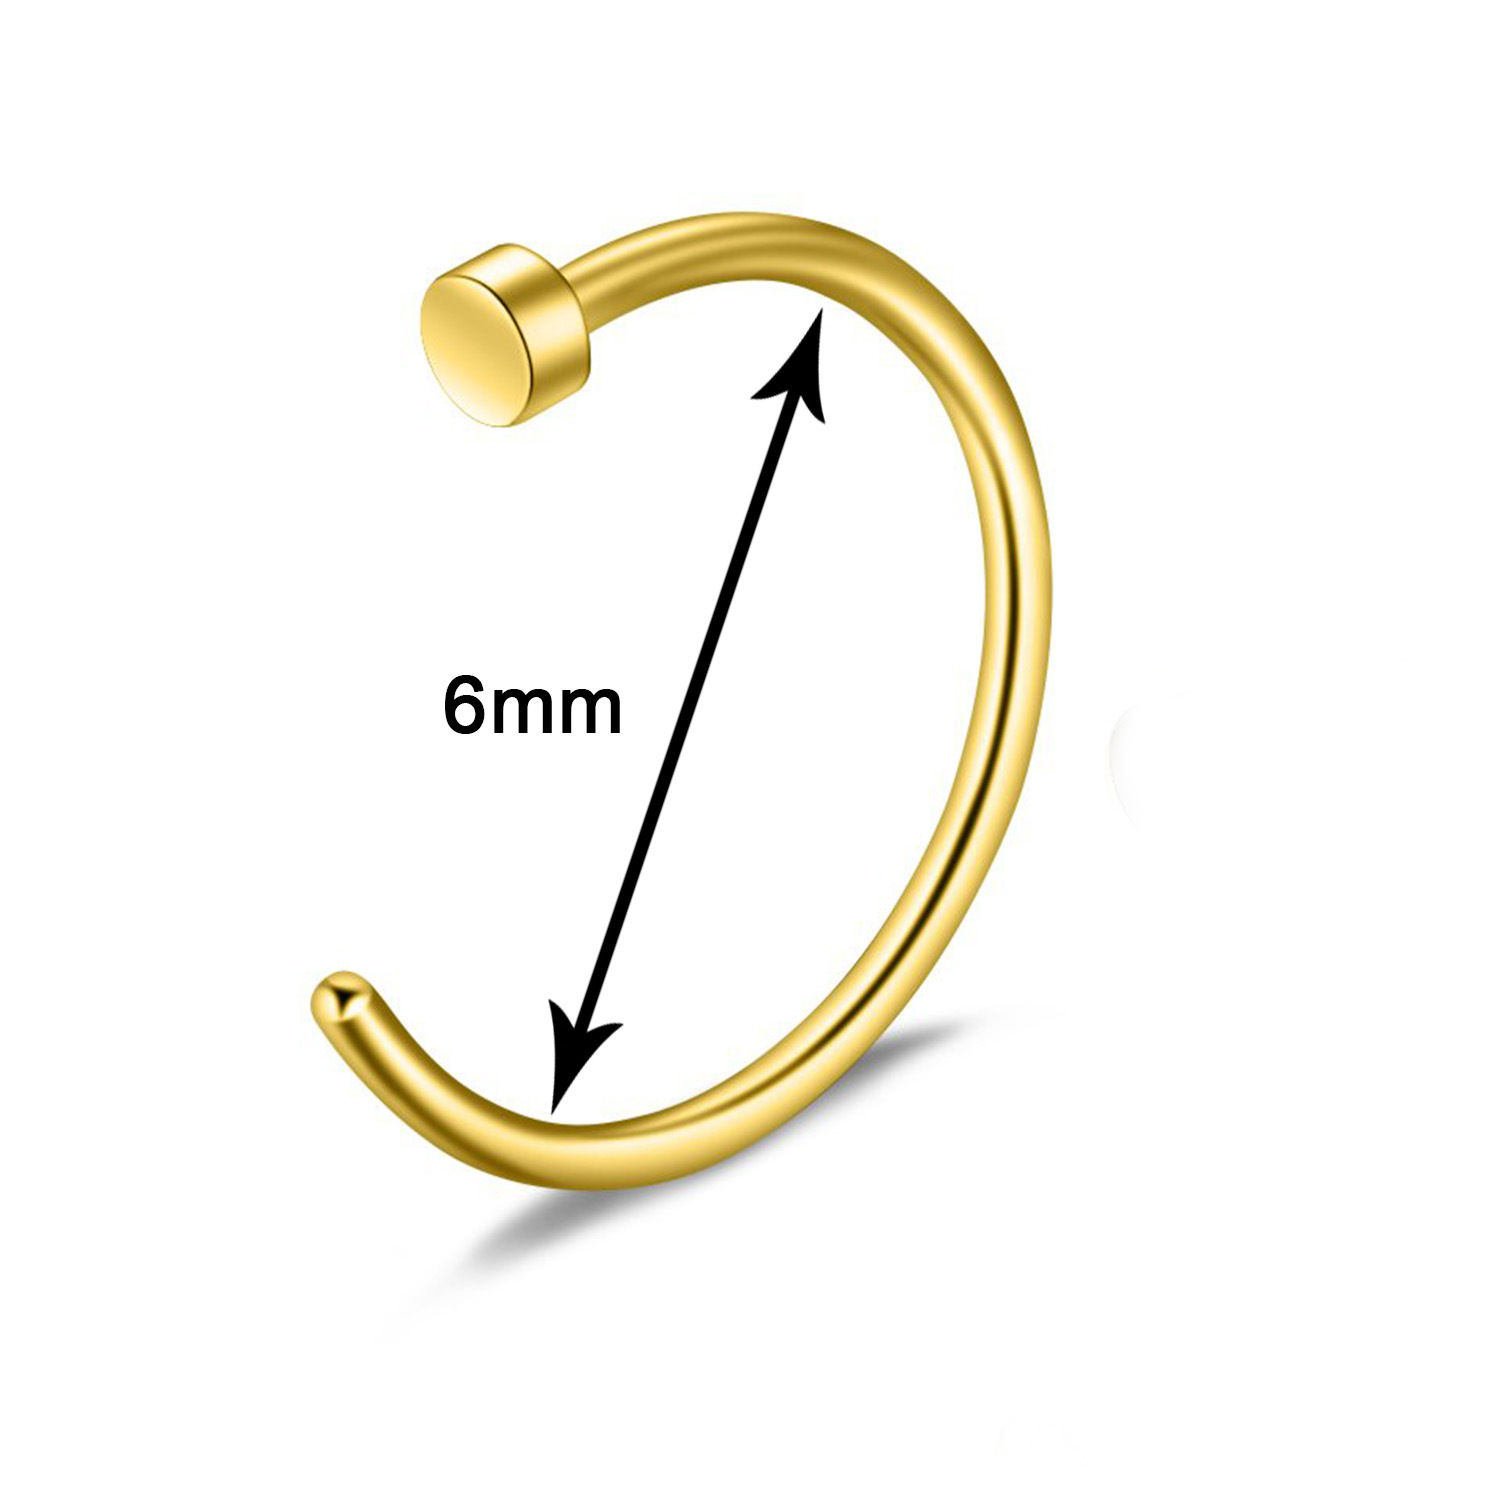 4:gold 6mm